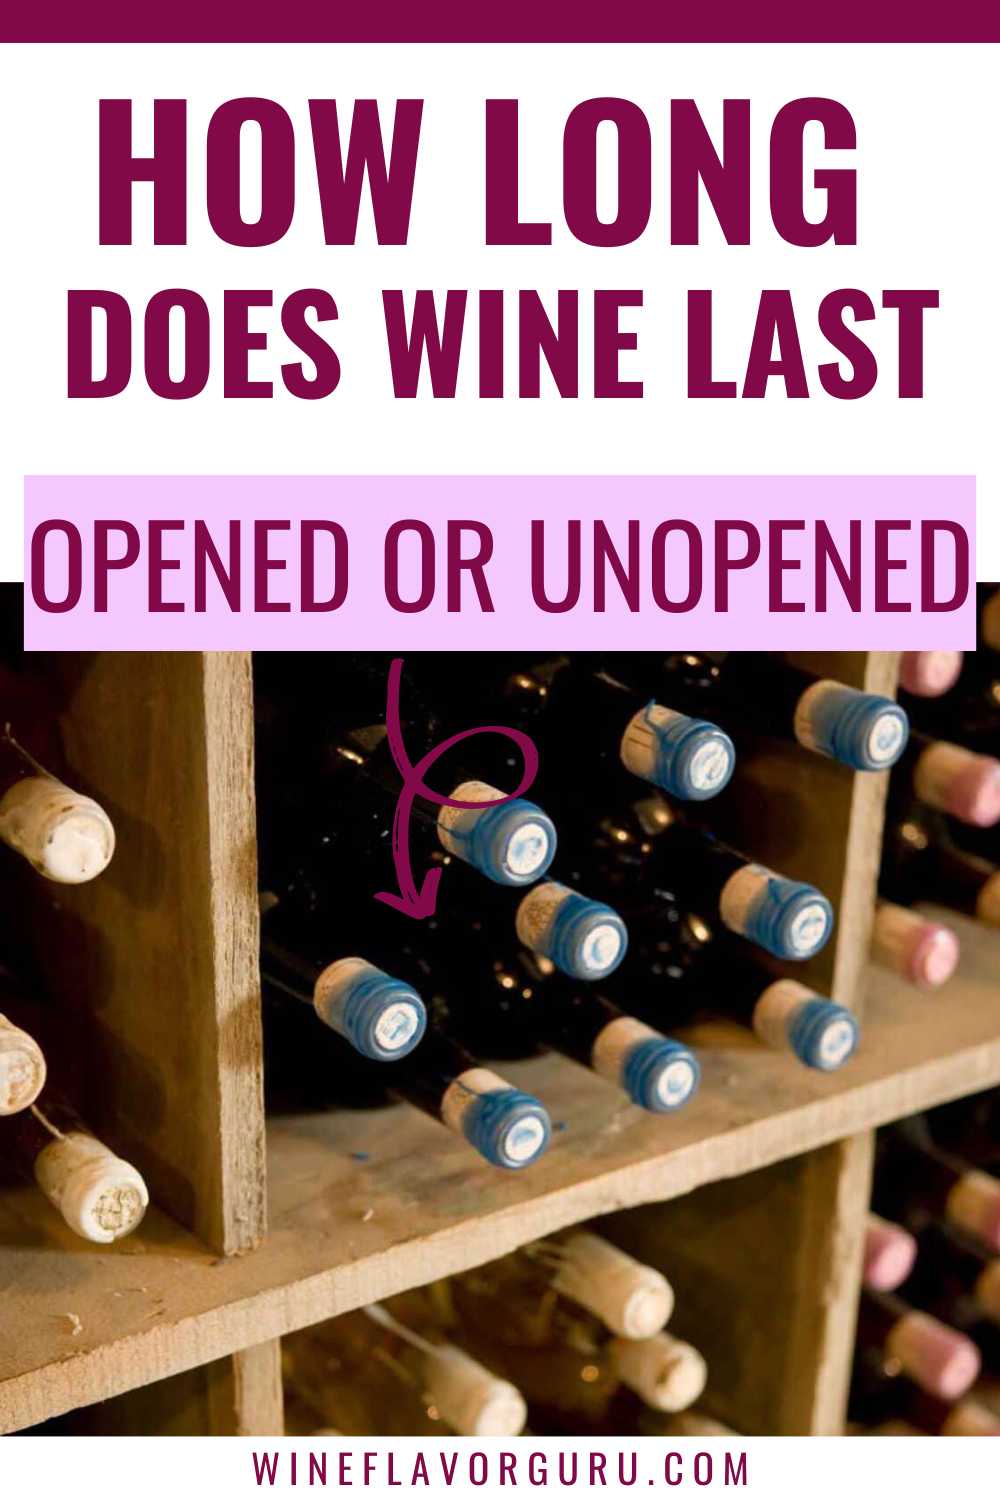 How Long Does Unopened Wine Last + Storage Tips – Surely